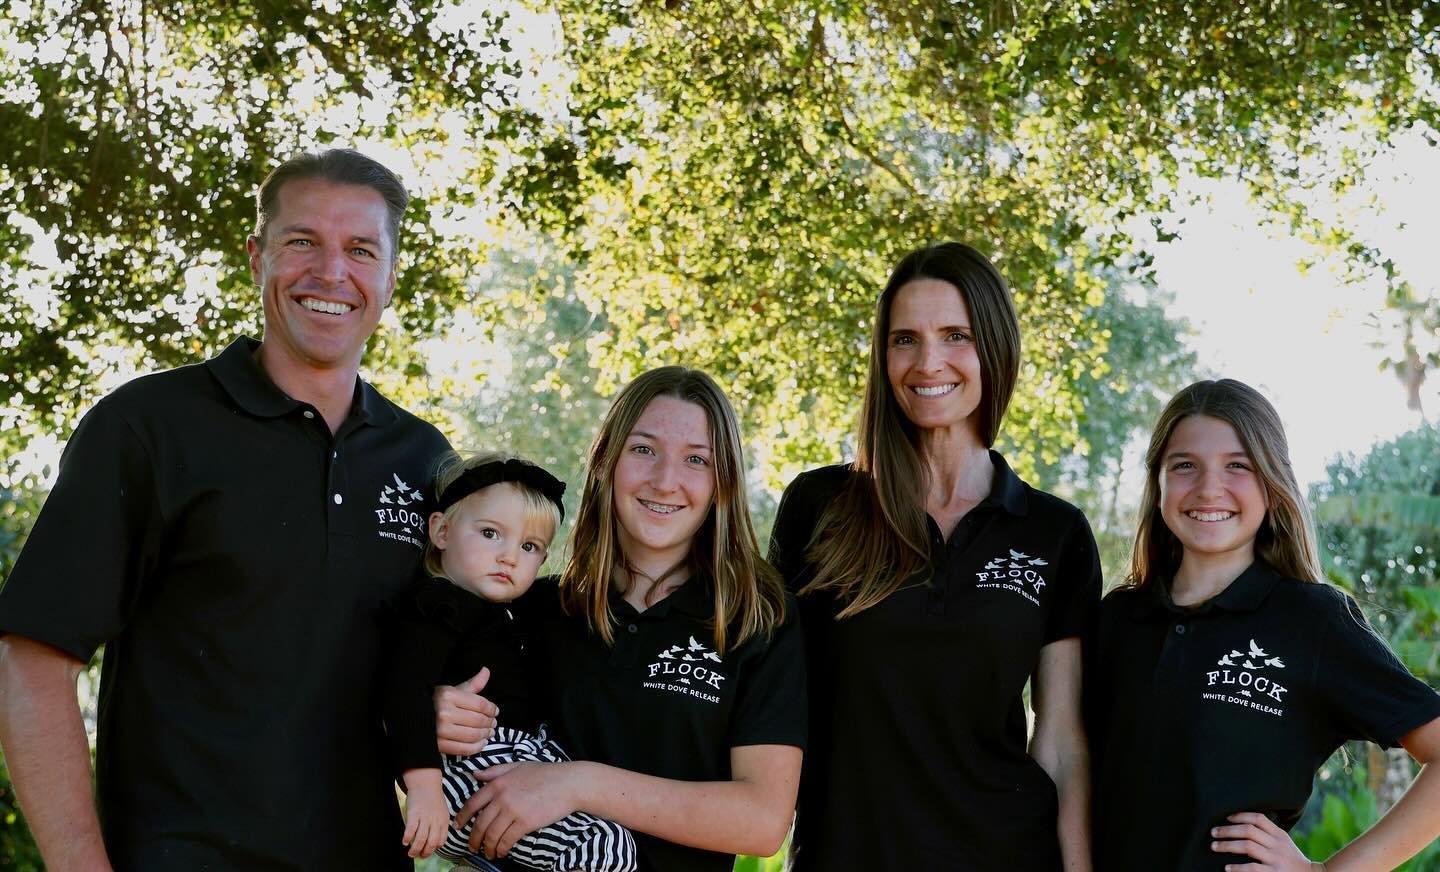 A FLOCK of white doves work as a team. Meet the human team that works behind the scenes to make this unique experience come to life. 

FLOCK is a family-owned and operated business. We love what we do! From left to right in the photo: Daniel, Kelly, 